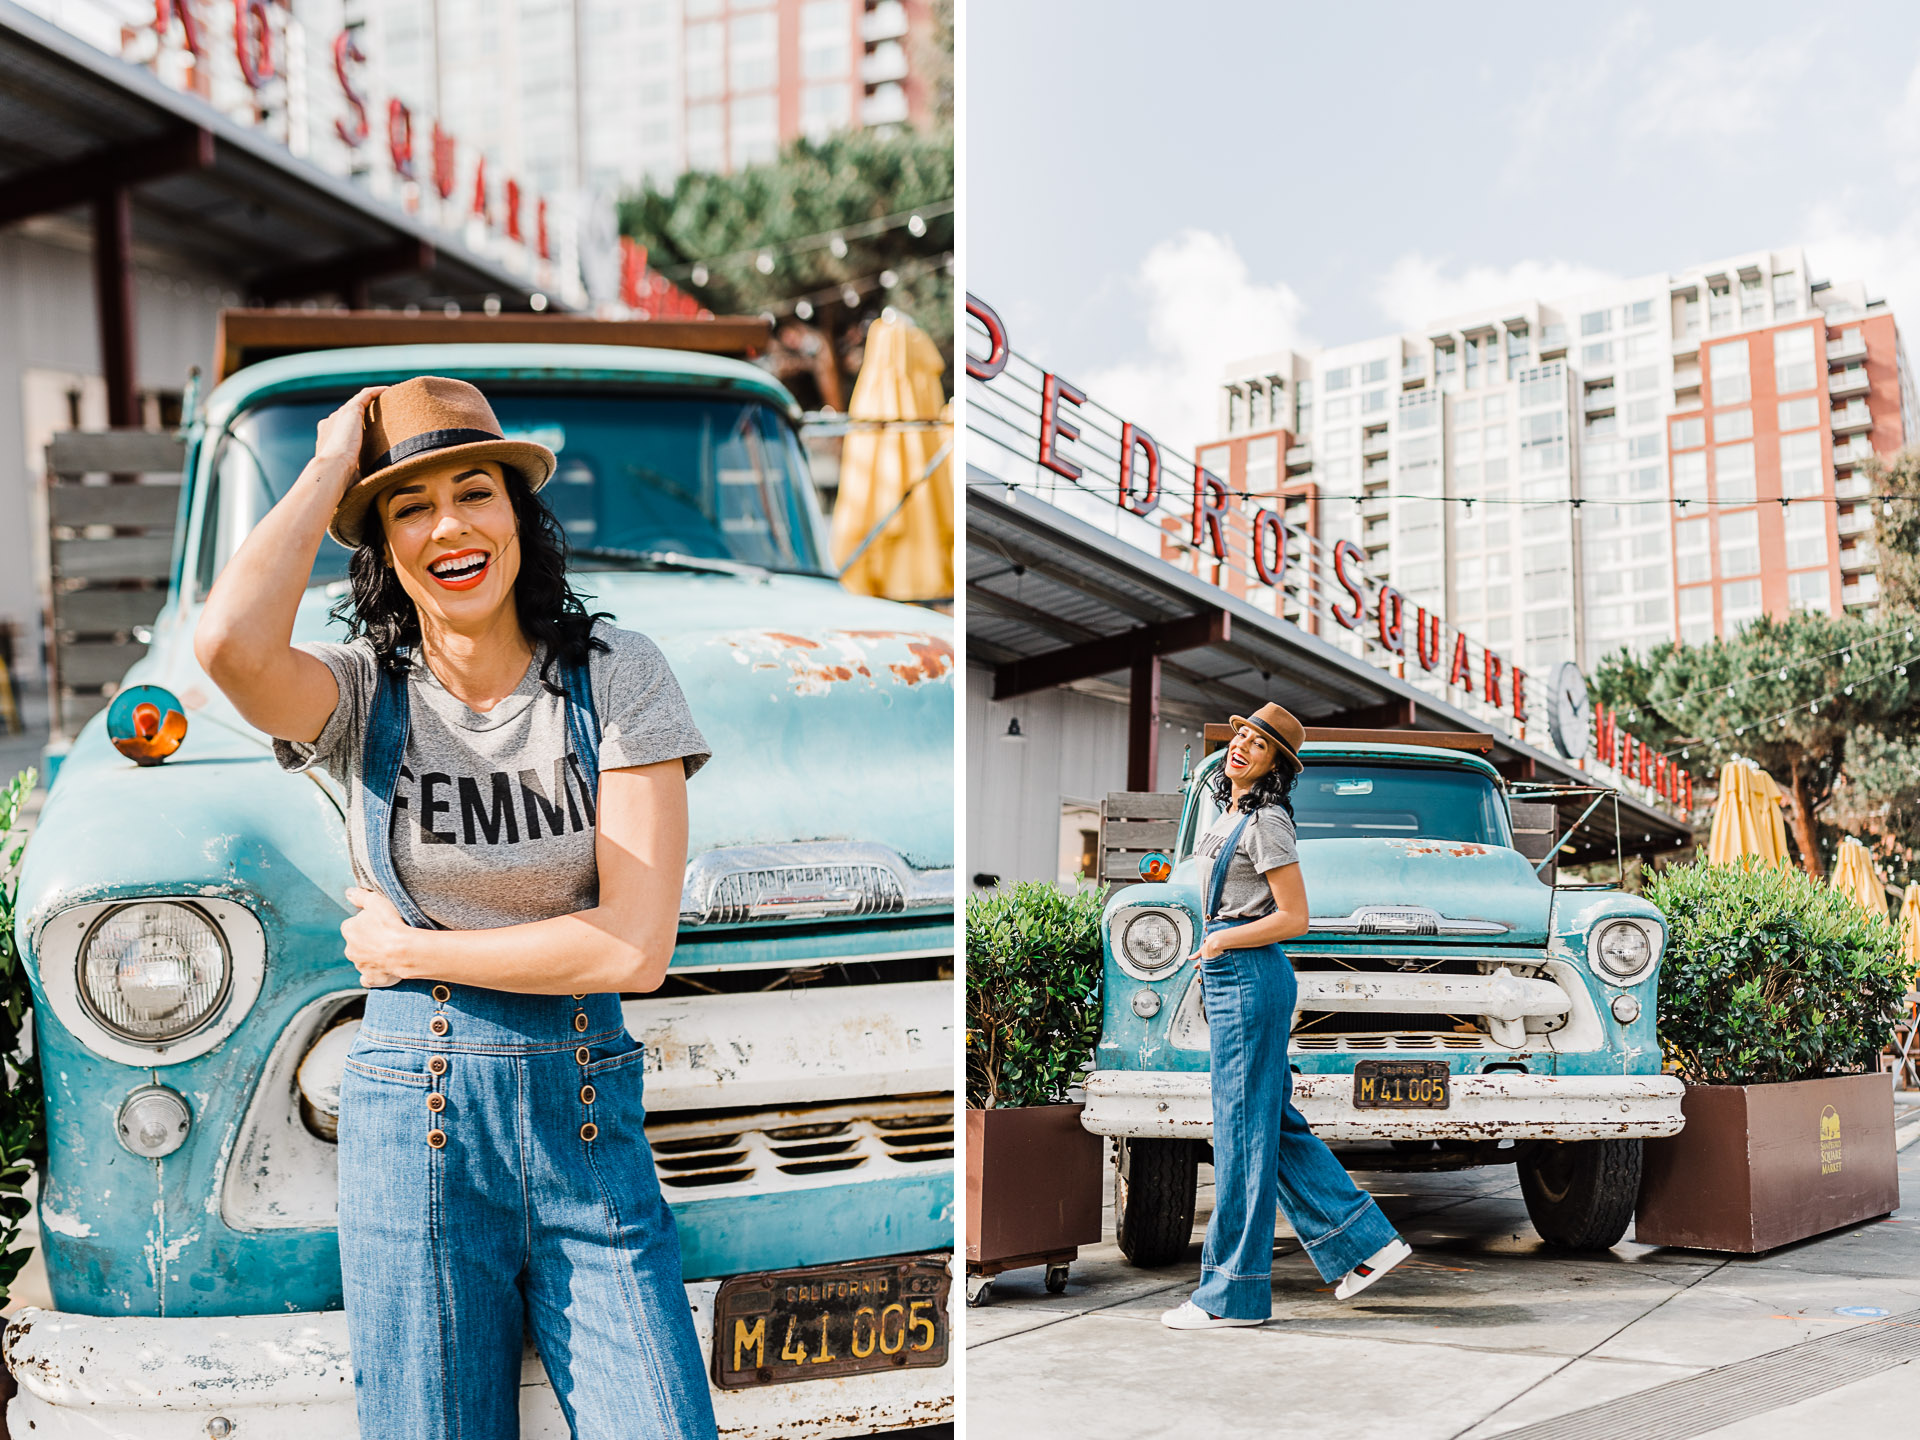 Woman wearing grey "femme" shirt wearing overalls, standing in front of a blue decorative truck at the San Pedro Square Market.